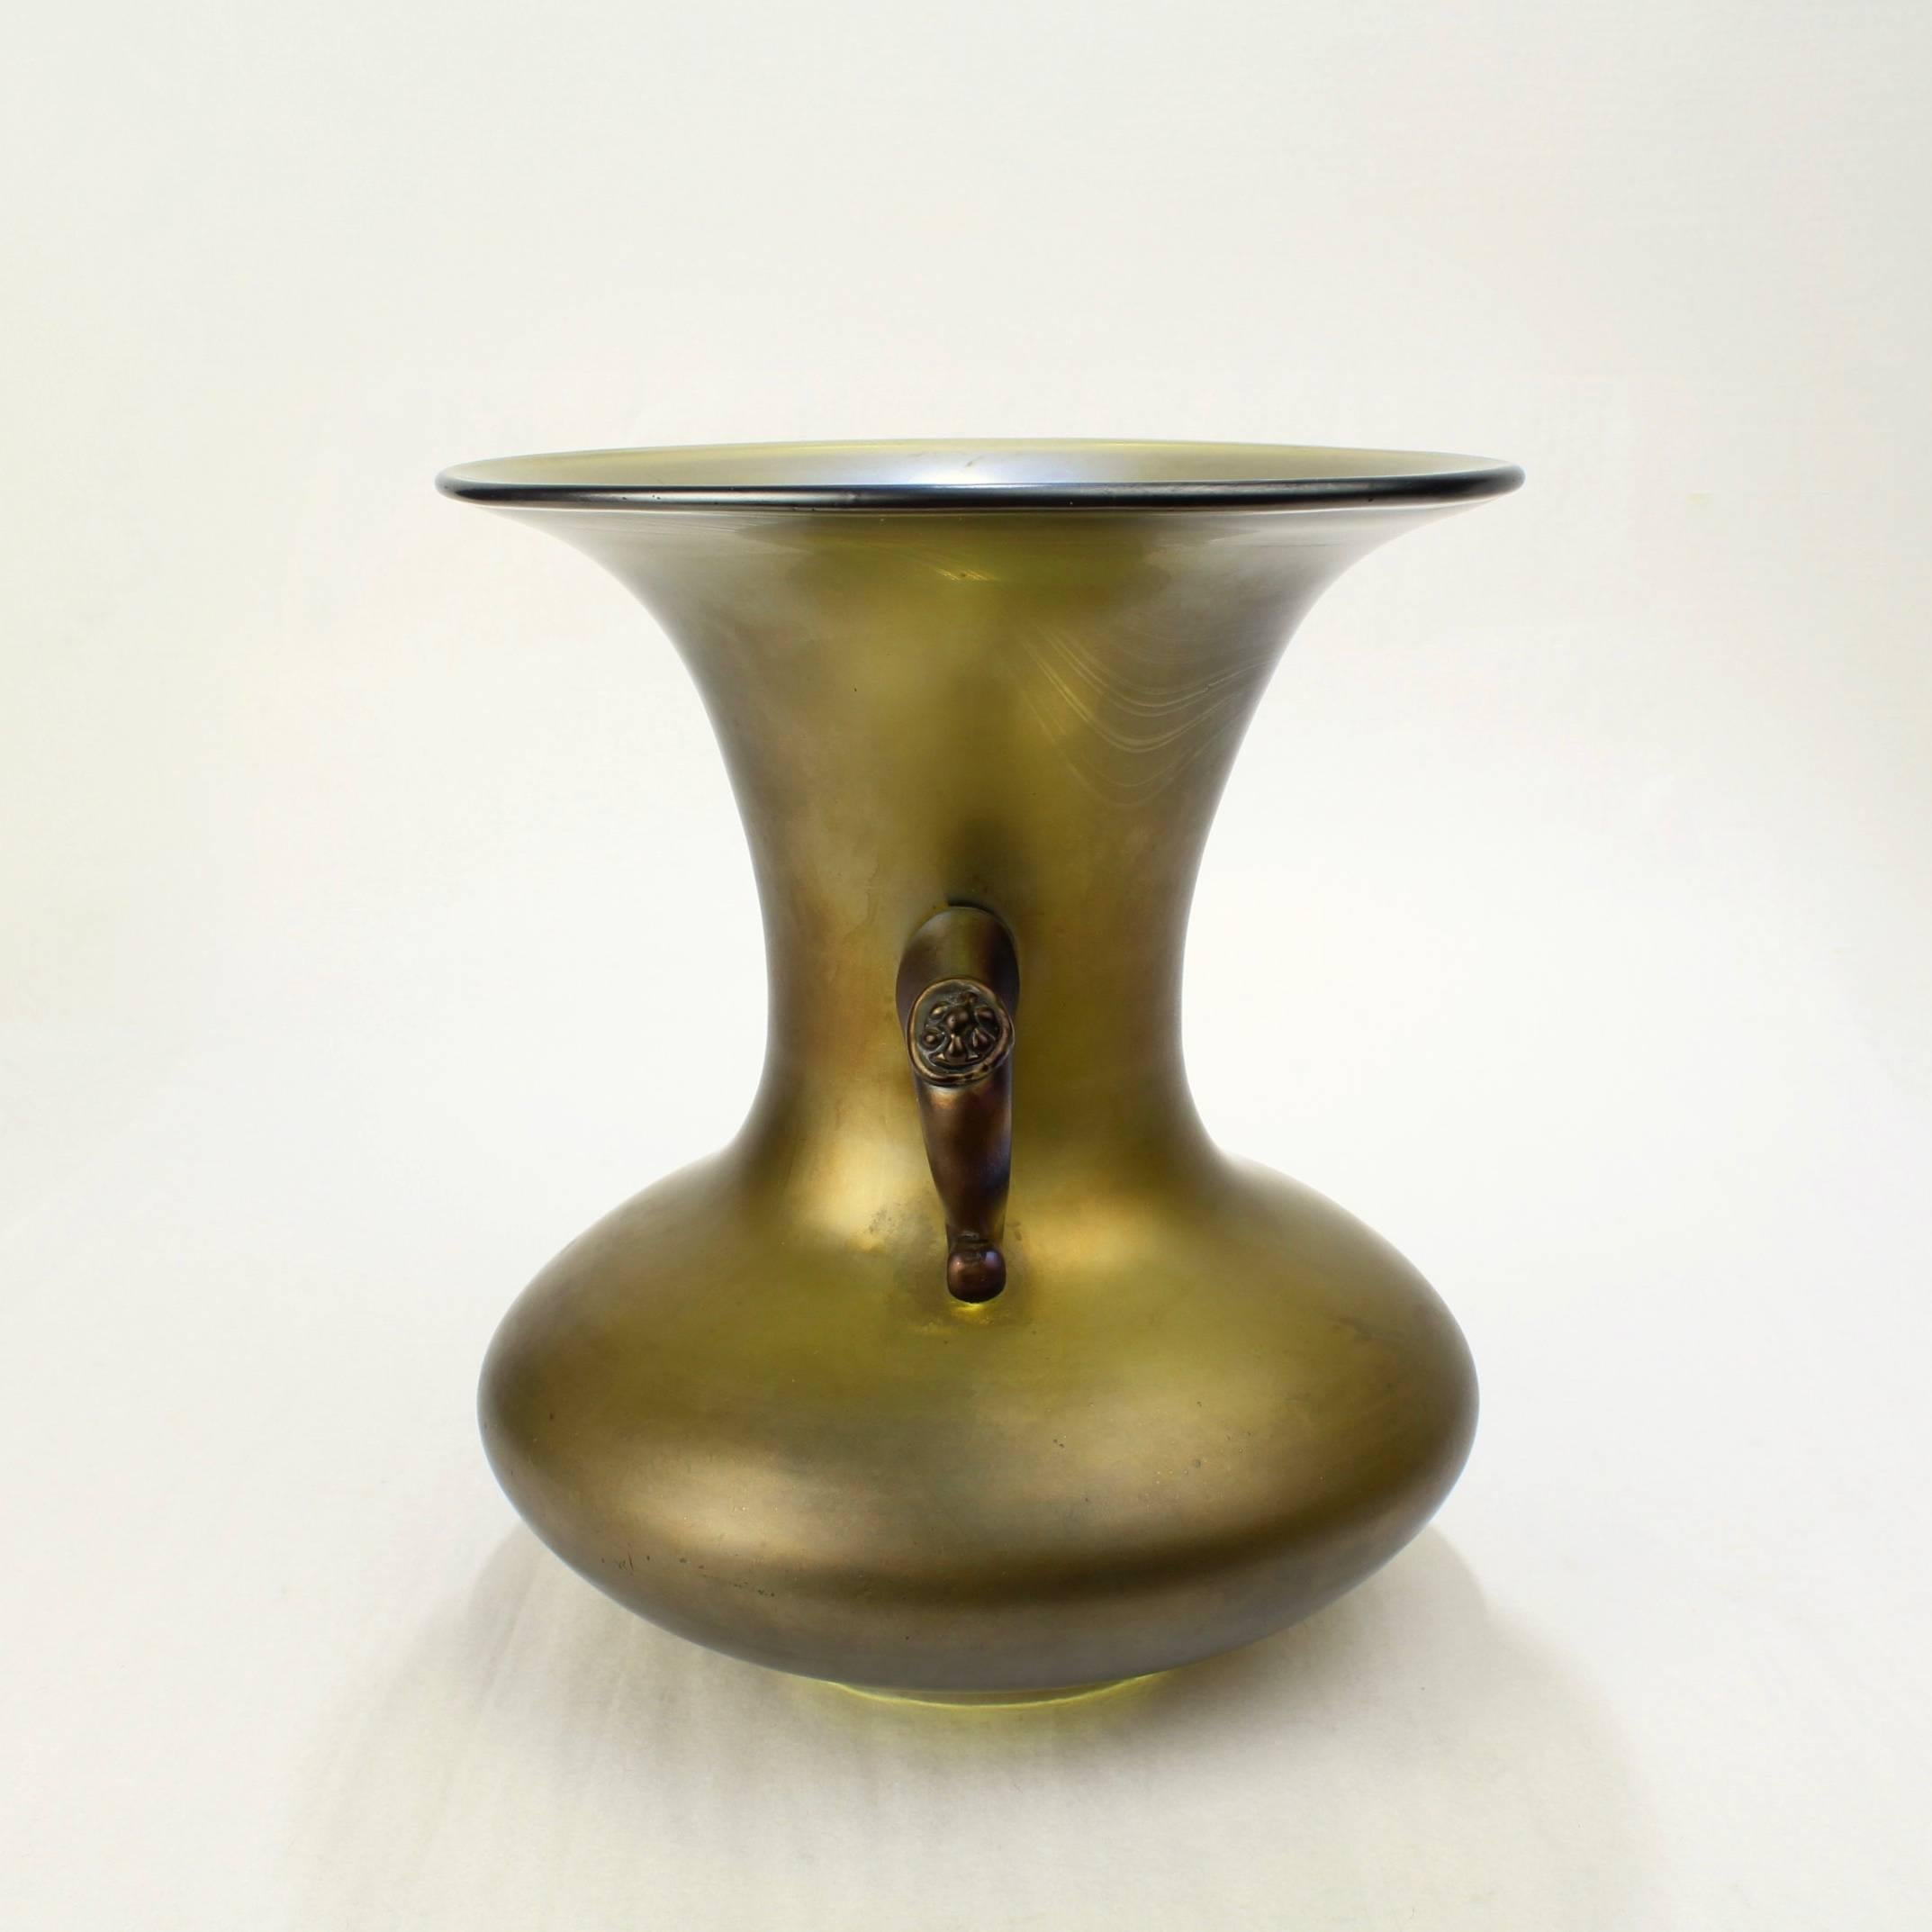 A good antique Loetz vase with an early bronze or bronce glatt iridescent finish.

With applied handles with button knops.

The form inspired by early Japanese design. 

Height: ca. 7 3/4 in.

Items purchased from David Sterner Antiques must